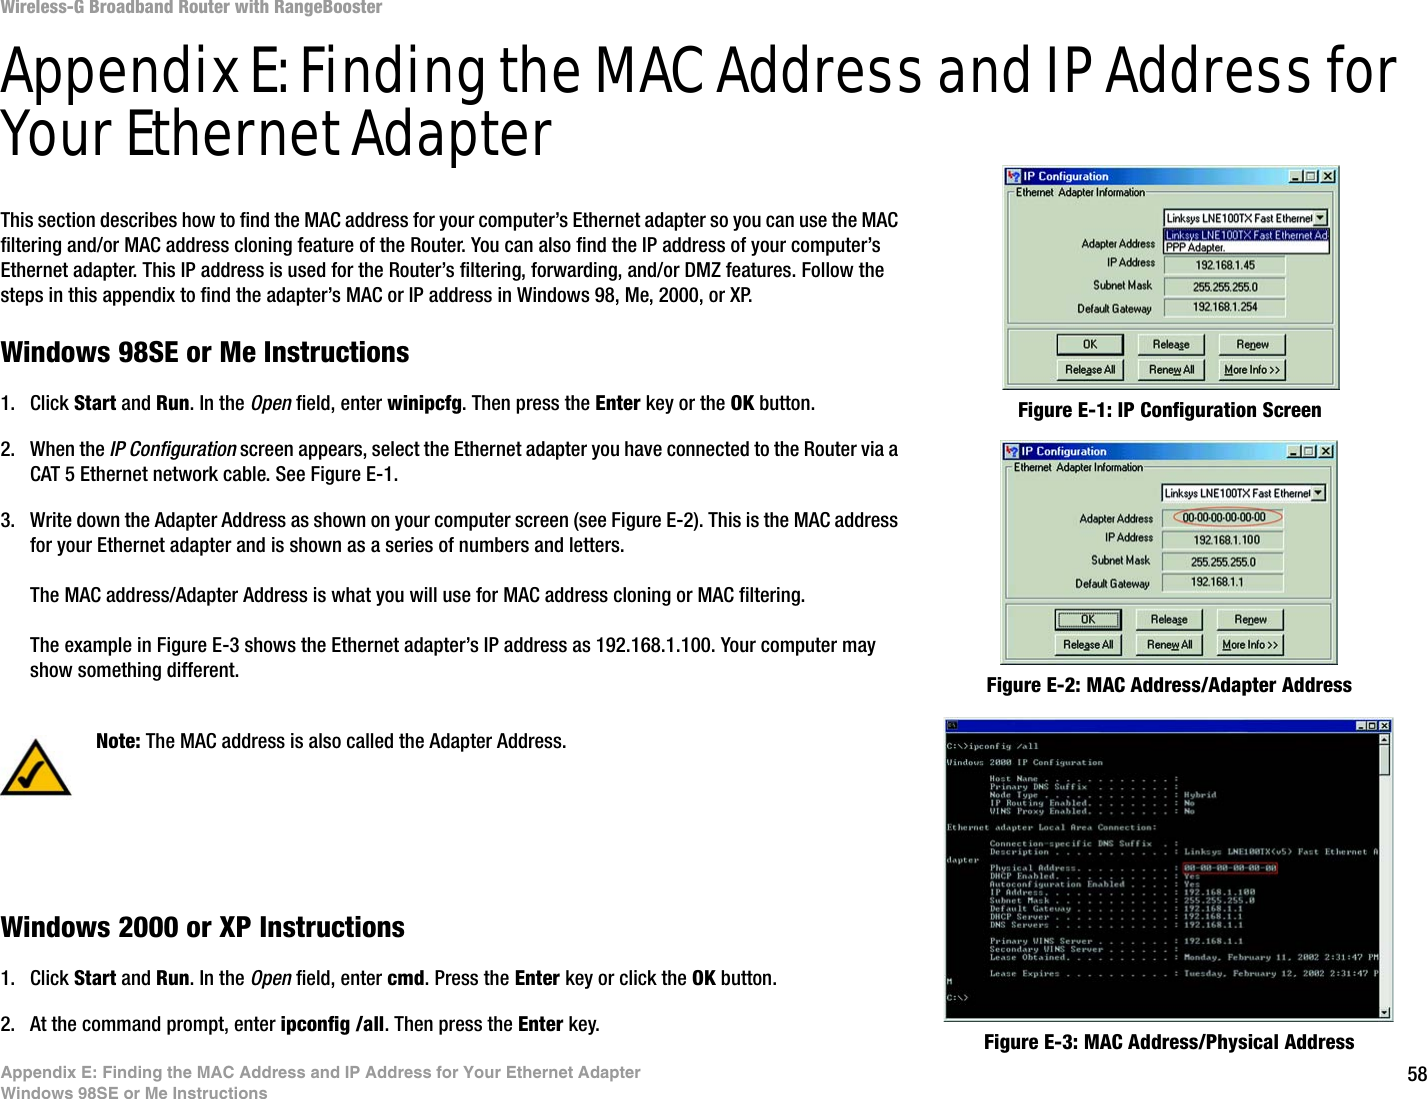 58Appendix E: Finding the MAC Address and IP Address for Your Ethernet AdapterWindows 98SE or Me InstructionsWireless-G Broadband Router with RangeBoosterAppendix E: Finding the MAC Address and IP Address for Your Ethernet AdapterThis section describes how to find the MAC address for your computer’s Ethernet adapter so you can use the MAC filtering and/or MAC address cloning feature of the Router. You can also find the IP address of your computer’s Ethernet adapter. This IP address is used for the Router’s filtering, forwarding, and/or DMZ features. Follow the steps in this appendix to find the adapter’s MAC or IP address in Windows 98, Me, 2000, or XP.Windows 98SE or Me Instructions1. Click Start and Run. In the Open field, enter winipcfg. Then press the Enter key or the OK button. 2. When the IP Configuration screen appears, select the Ethernet adapter you have connected to the Router via a CAT 5 Ethernet network cable. See Figure E-1.3. Write down the Adapter Address as shown on your computer screen (see Figure E-2). This is the MAC address for your Ethernet adapter and is shown as a series of numbers and letters.The MAC address/Adapter Address is what you will use for MAC address cloning or MAC filtering.The example in Figure E-3 shows the Ethernet adapter’s IP address as 192.168.1.100. Your computer may show something different.Windows 2000 or XP Instructions1. Click Start and Run. In the Open field, enter cmd. Press the Enter key or click the OK button.2. At the command prompt, enter ipconfig /all. Then press the Enter key.Figure E-2: MAC Address/Adapter AddressFigure E-1: IP Configuration ScreenNote: The MAC address is also called the Adapter Address.Figure E-3: MAC Address/Physical Address